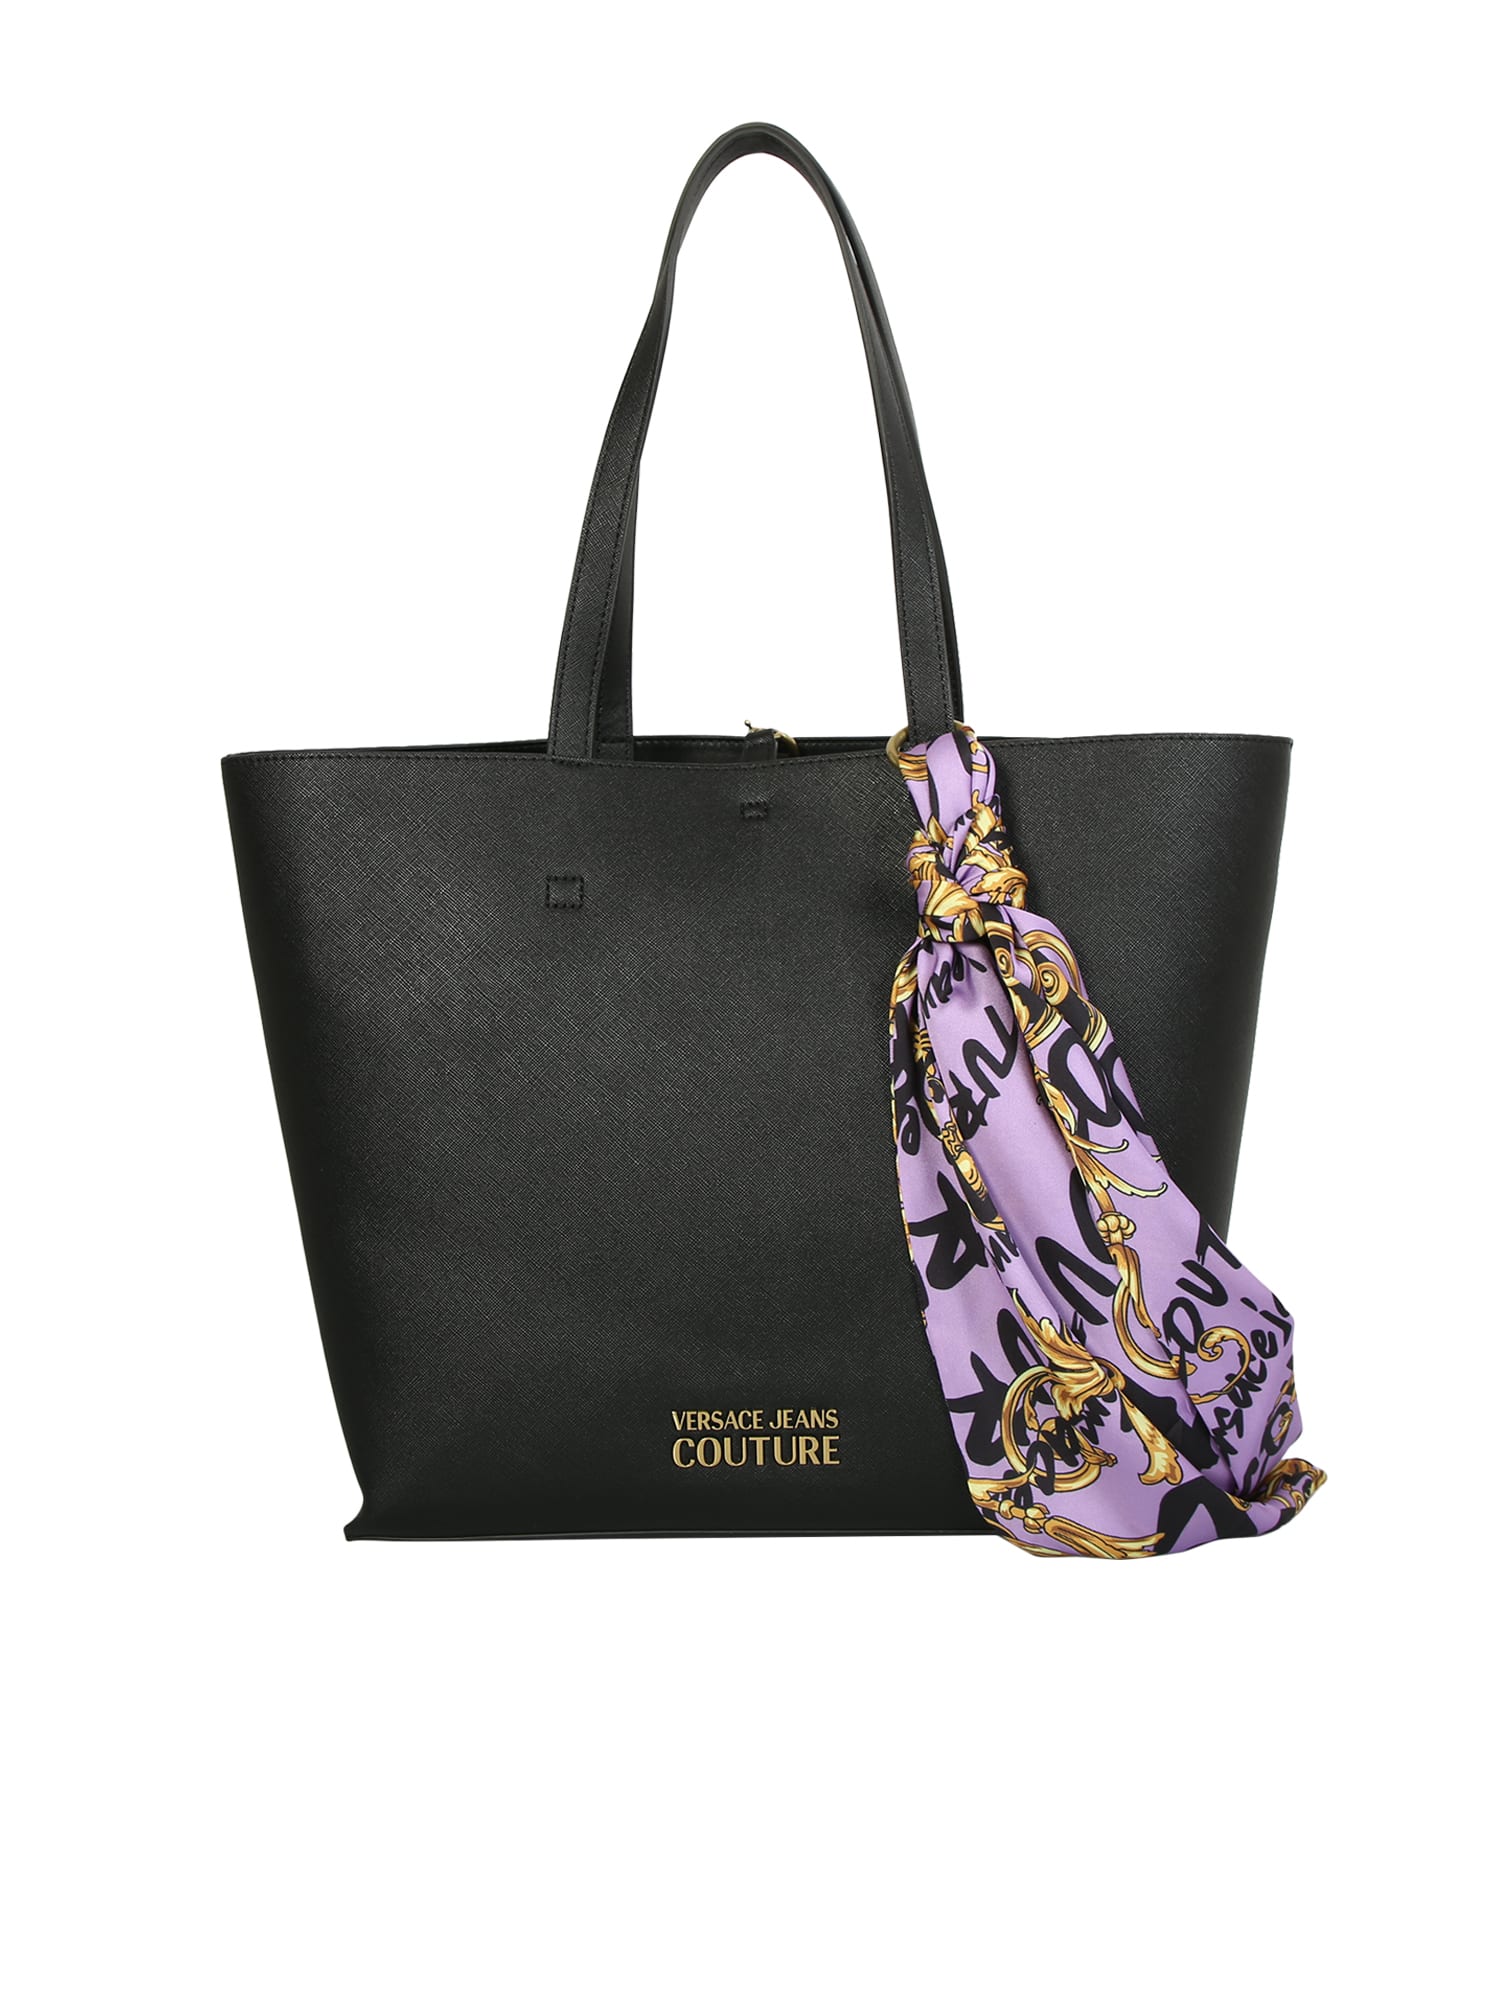 Versace Jeans Couture Adds A Signature Branded Touch To This Understated Tote Bag With The Attached Scarf